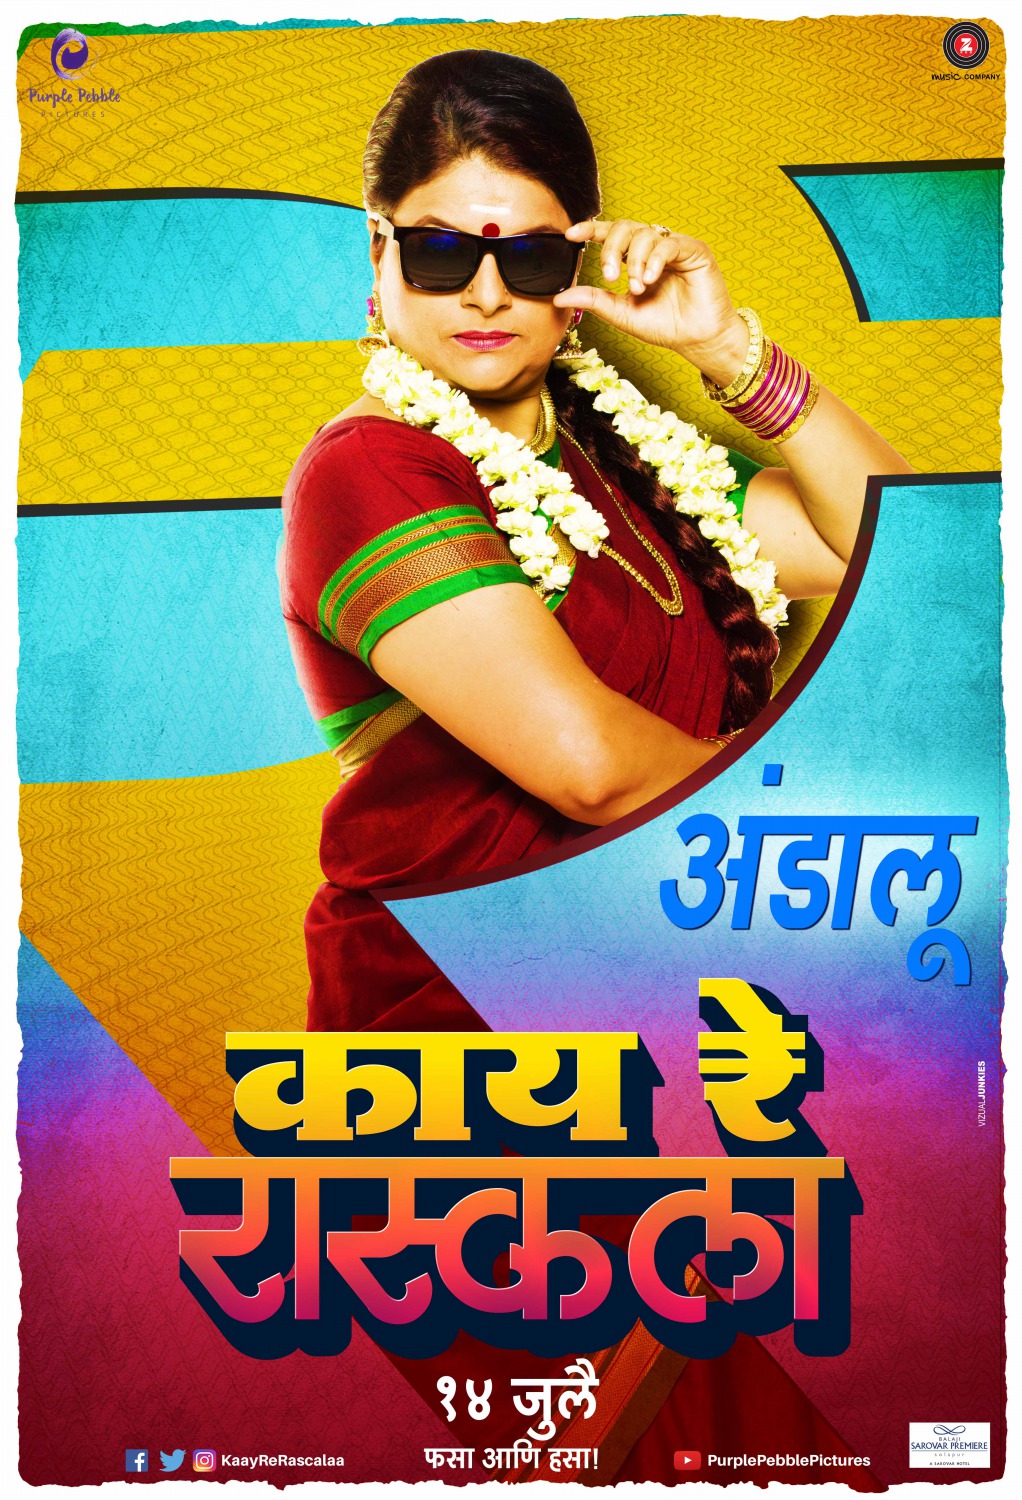 Extra Large Movie Poster Image for Kaay Re Rascalaa (#7 of 13)